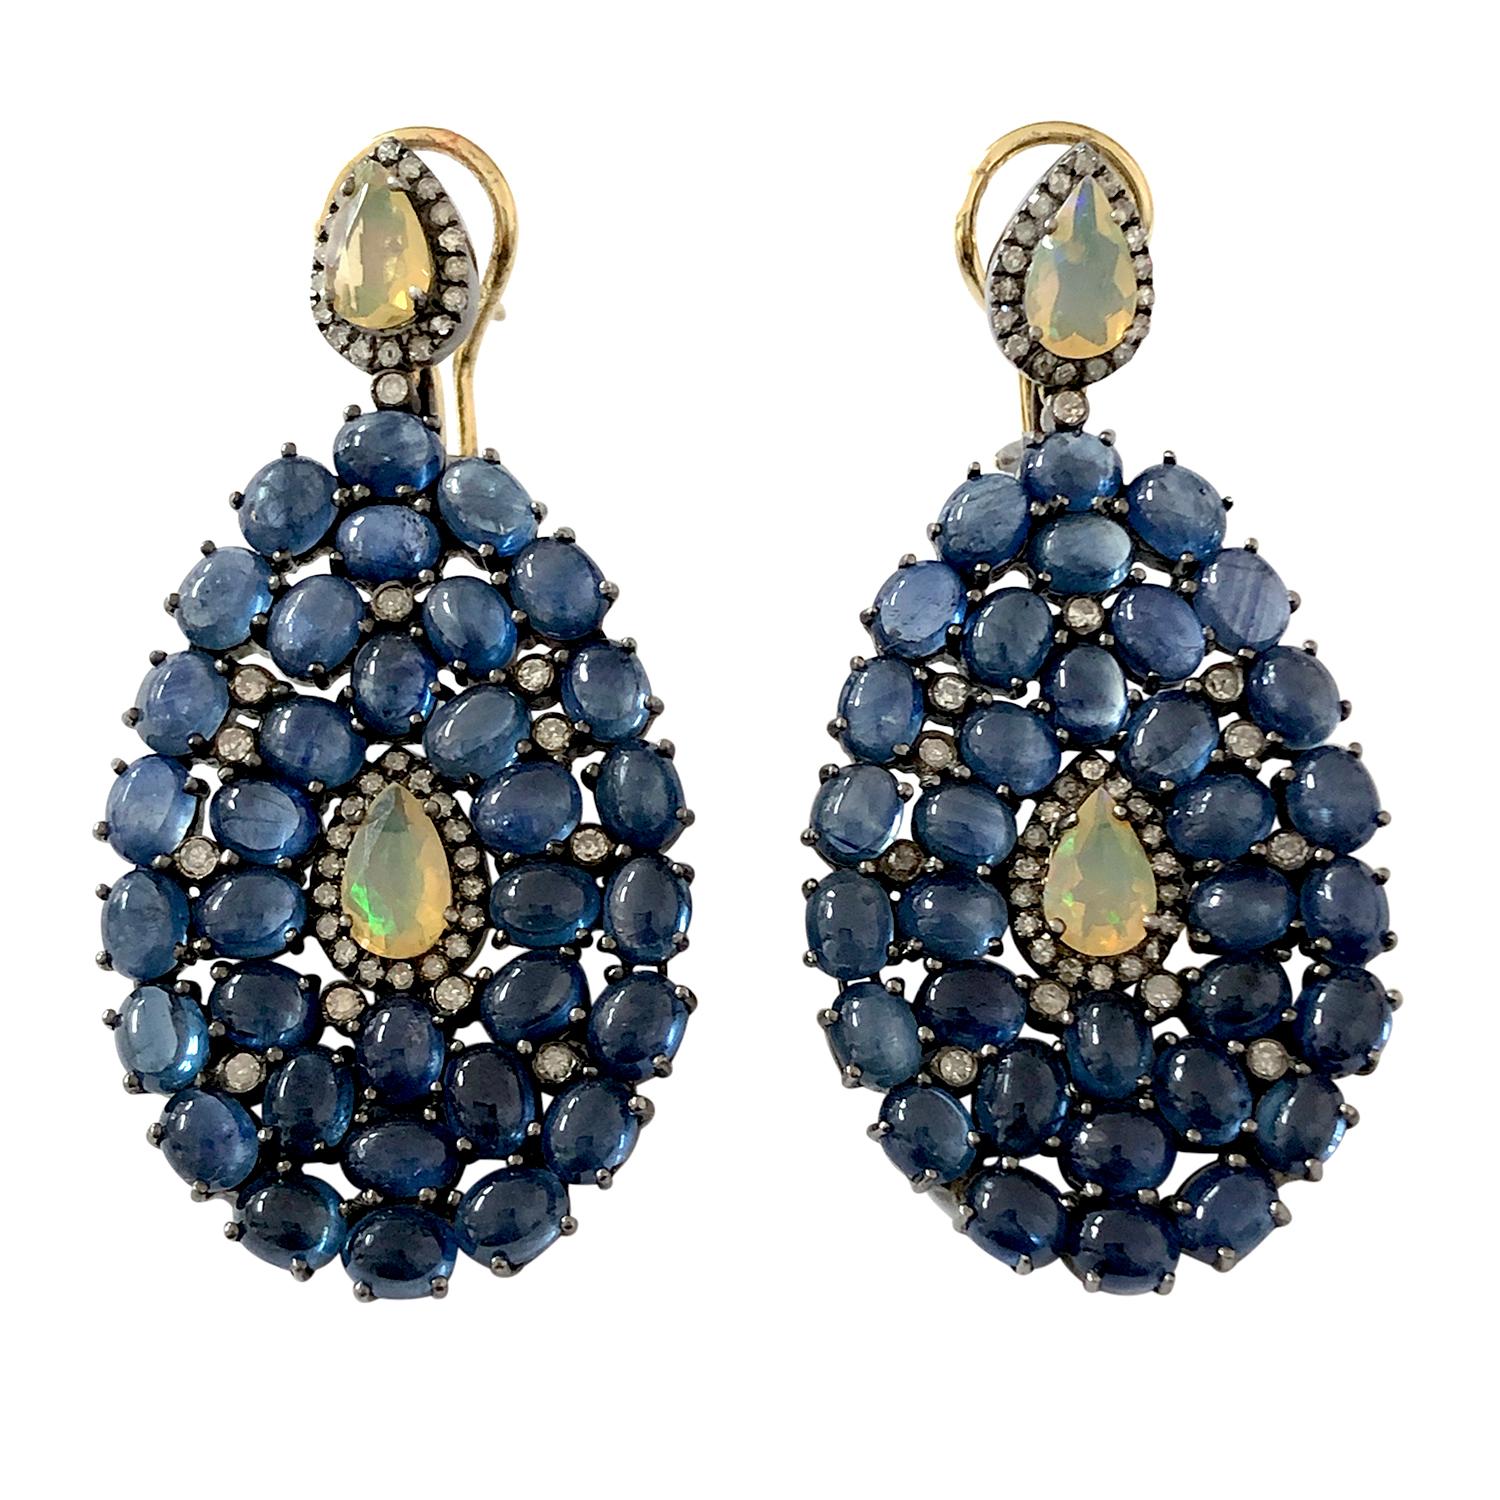 Cast from 18 karat gold & sterling silver, these beautiful earrings are hand set with 38.6 carats blue sapphire and .90 carats of shimmering diamonds.

FOLLOW  MEGHNA JEWELS storefront to view the latest collection & exclusive pieces.  Meghna Jewels